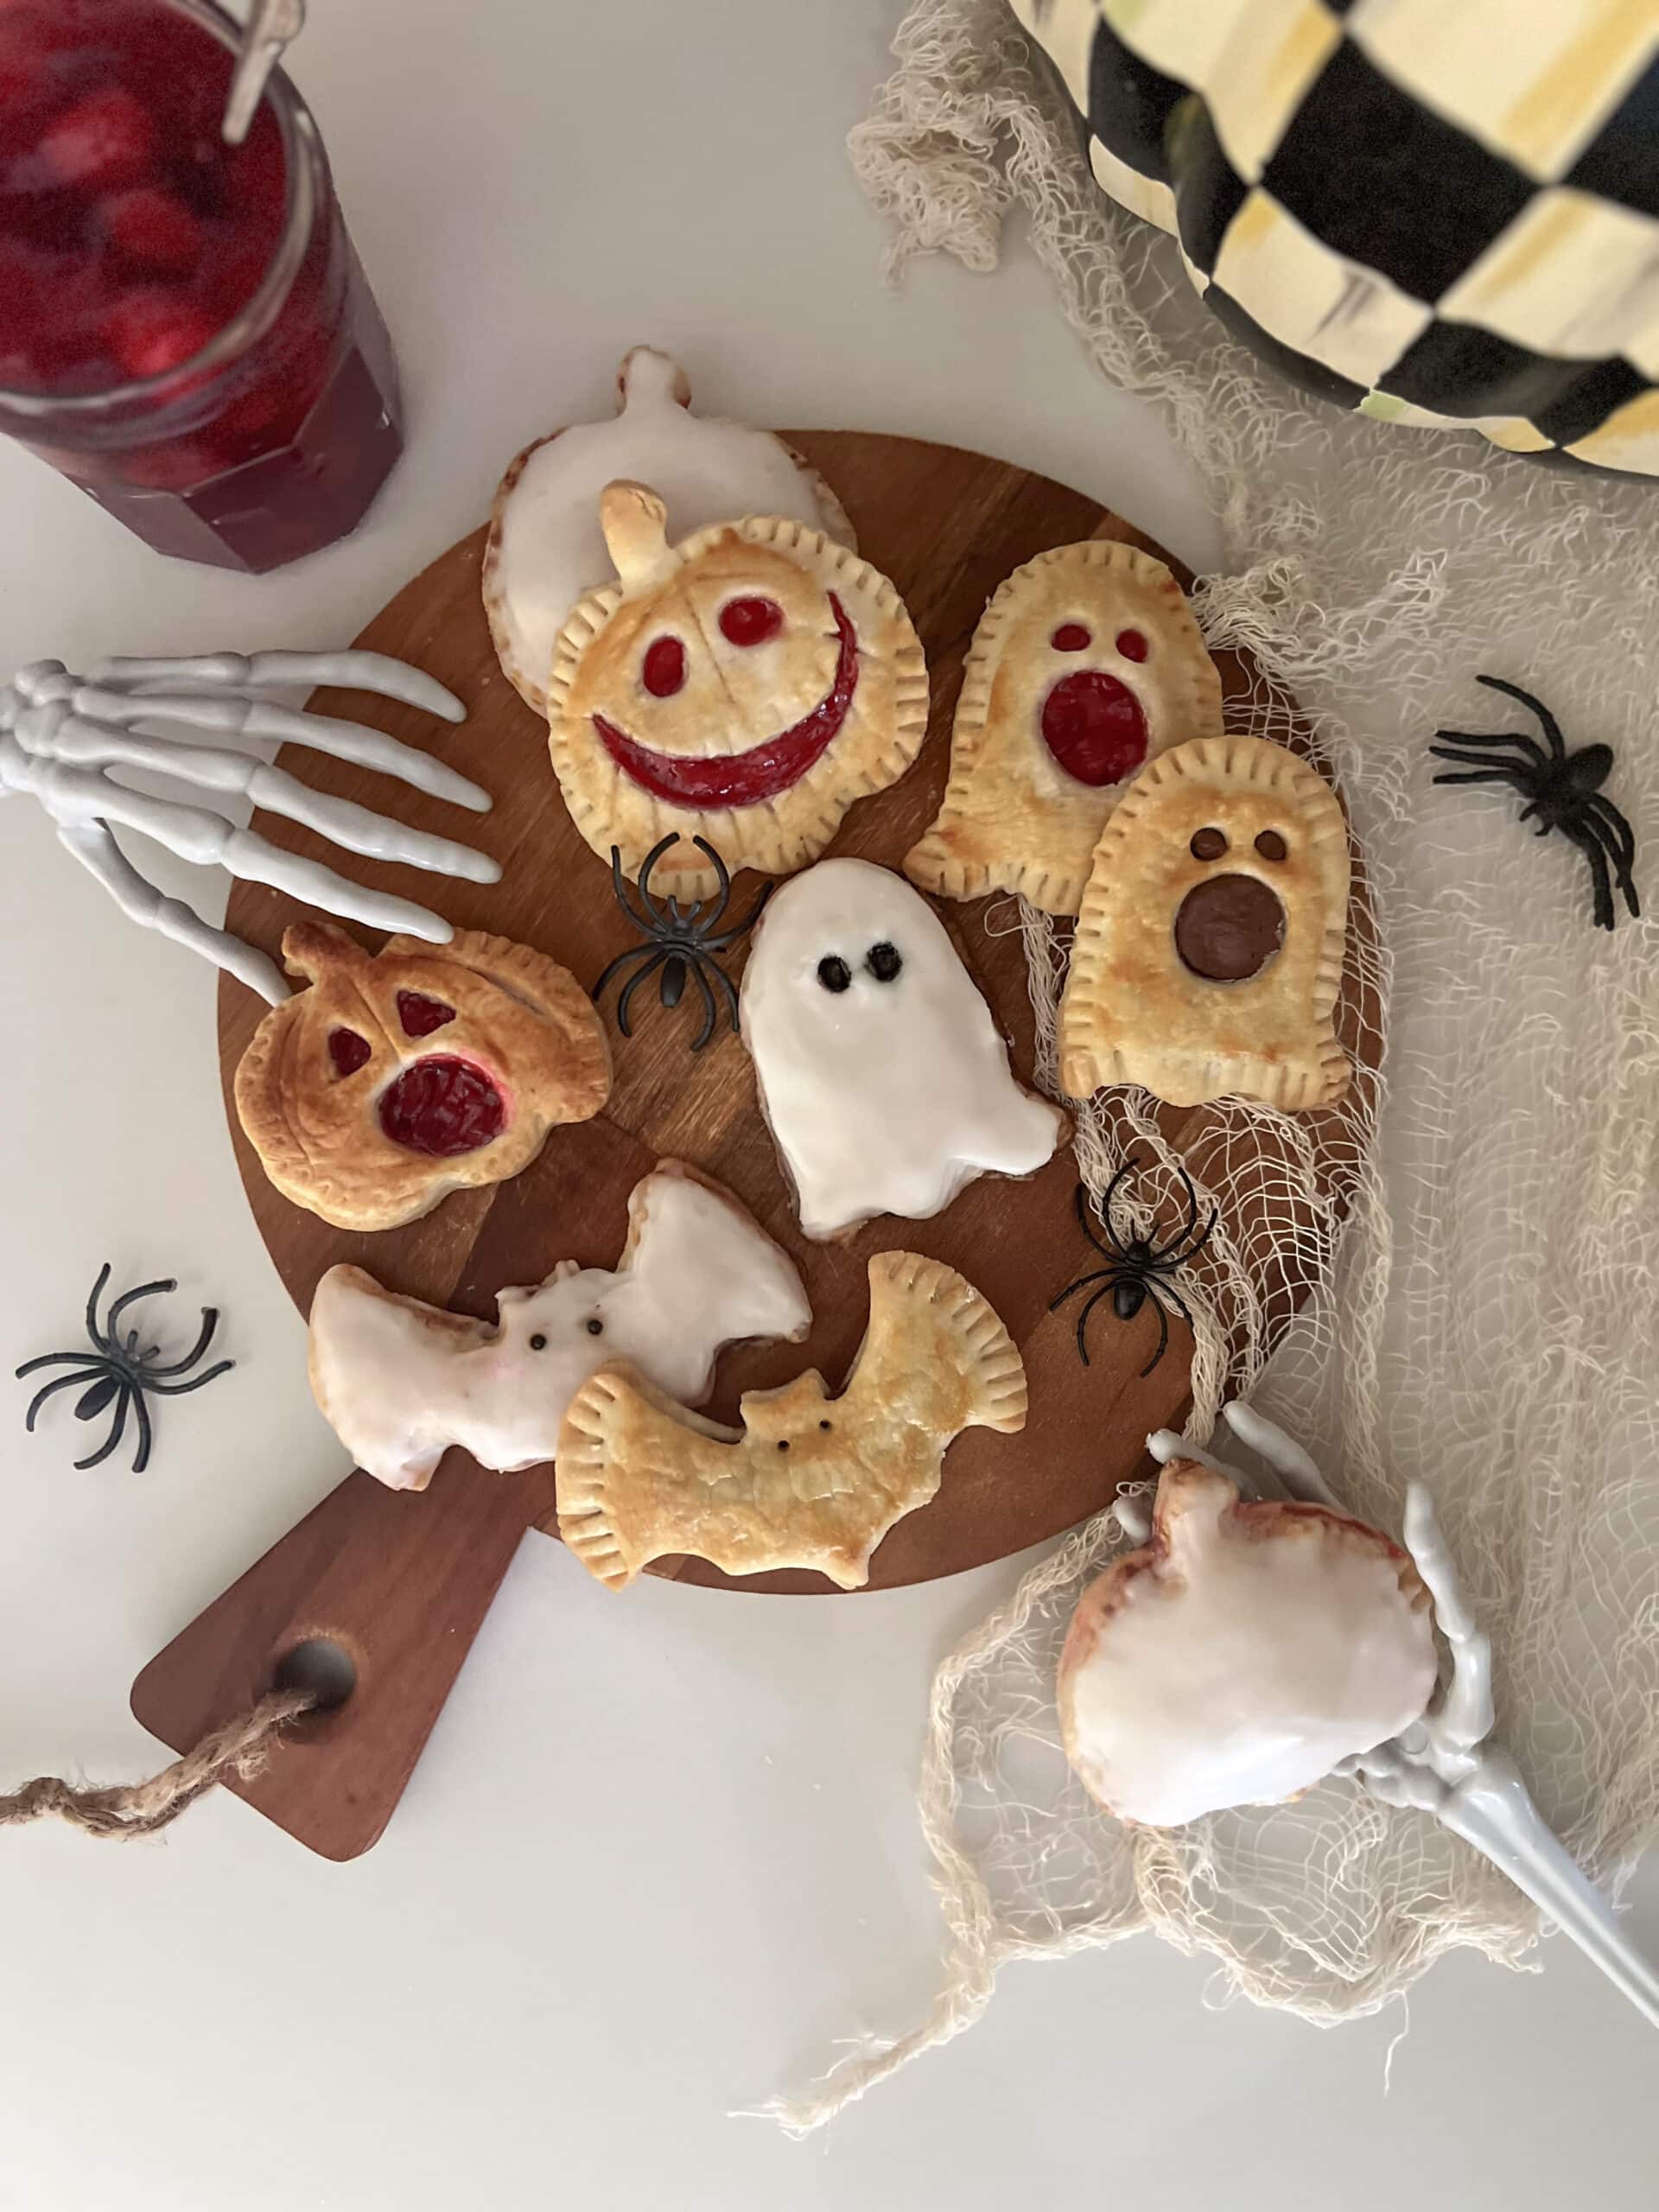 As easy as (Halloween) pie! Make these spooky hand pies in an hour, makes for a great breakfast treat or addition to a festive party! Add frosting for a "pop tart" style dessert!